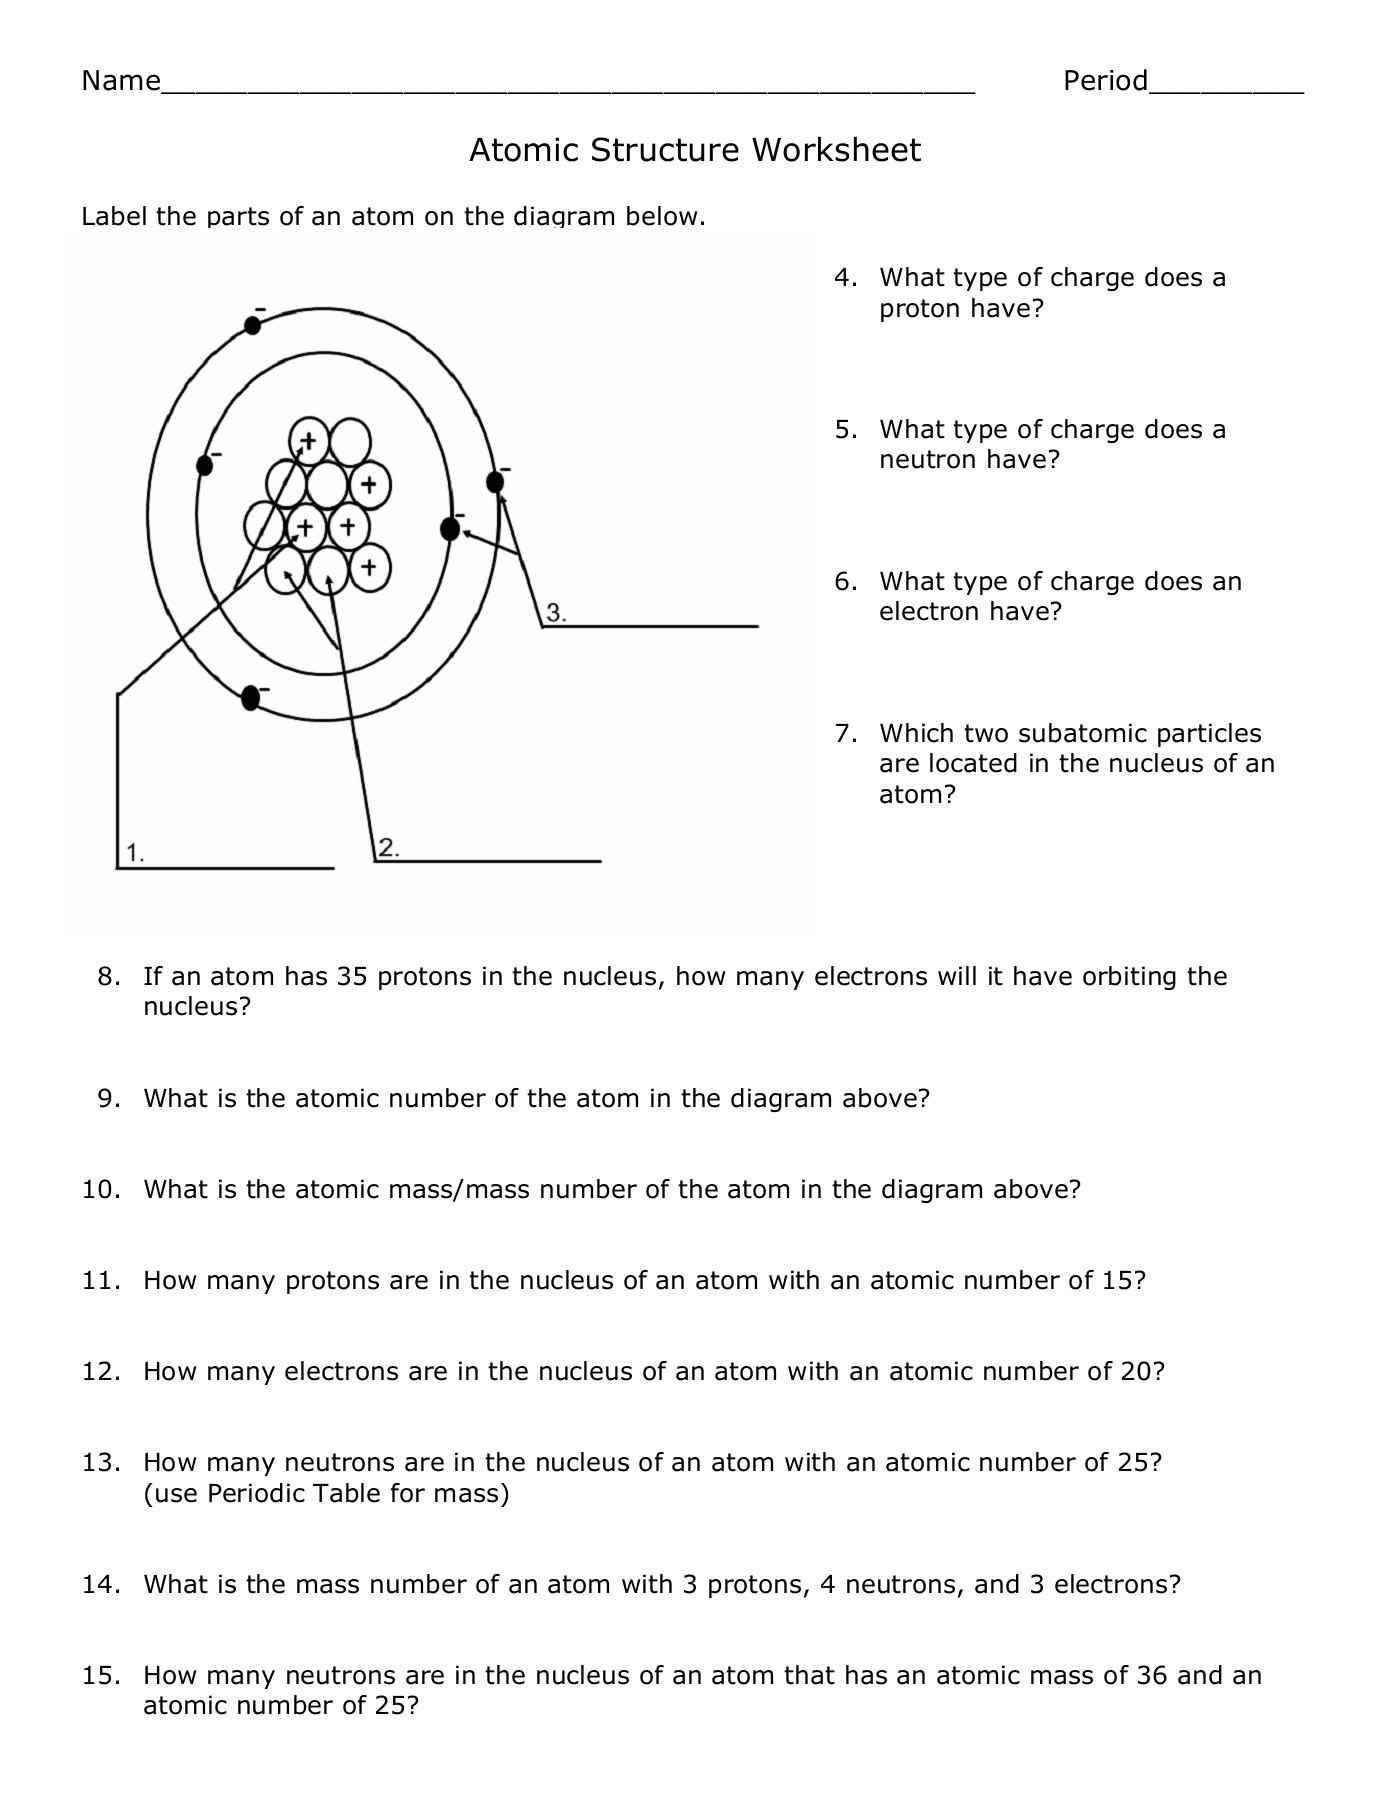 Atomic Structure Worksheet Answer Key atomic Structure Worksheet Shelby County Schools Pages 1